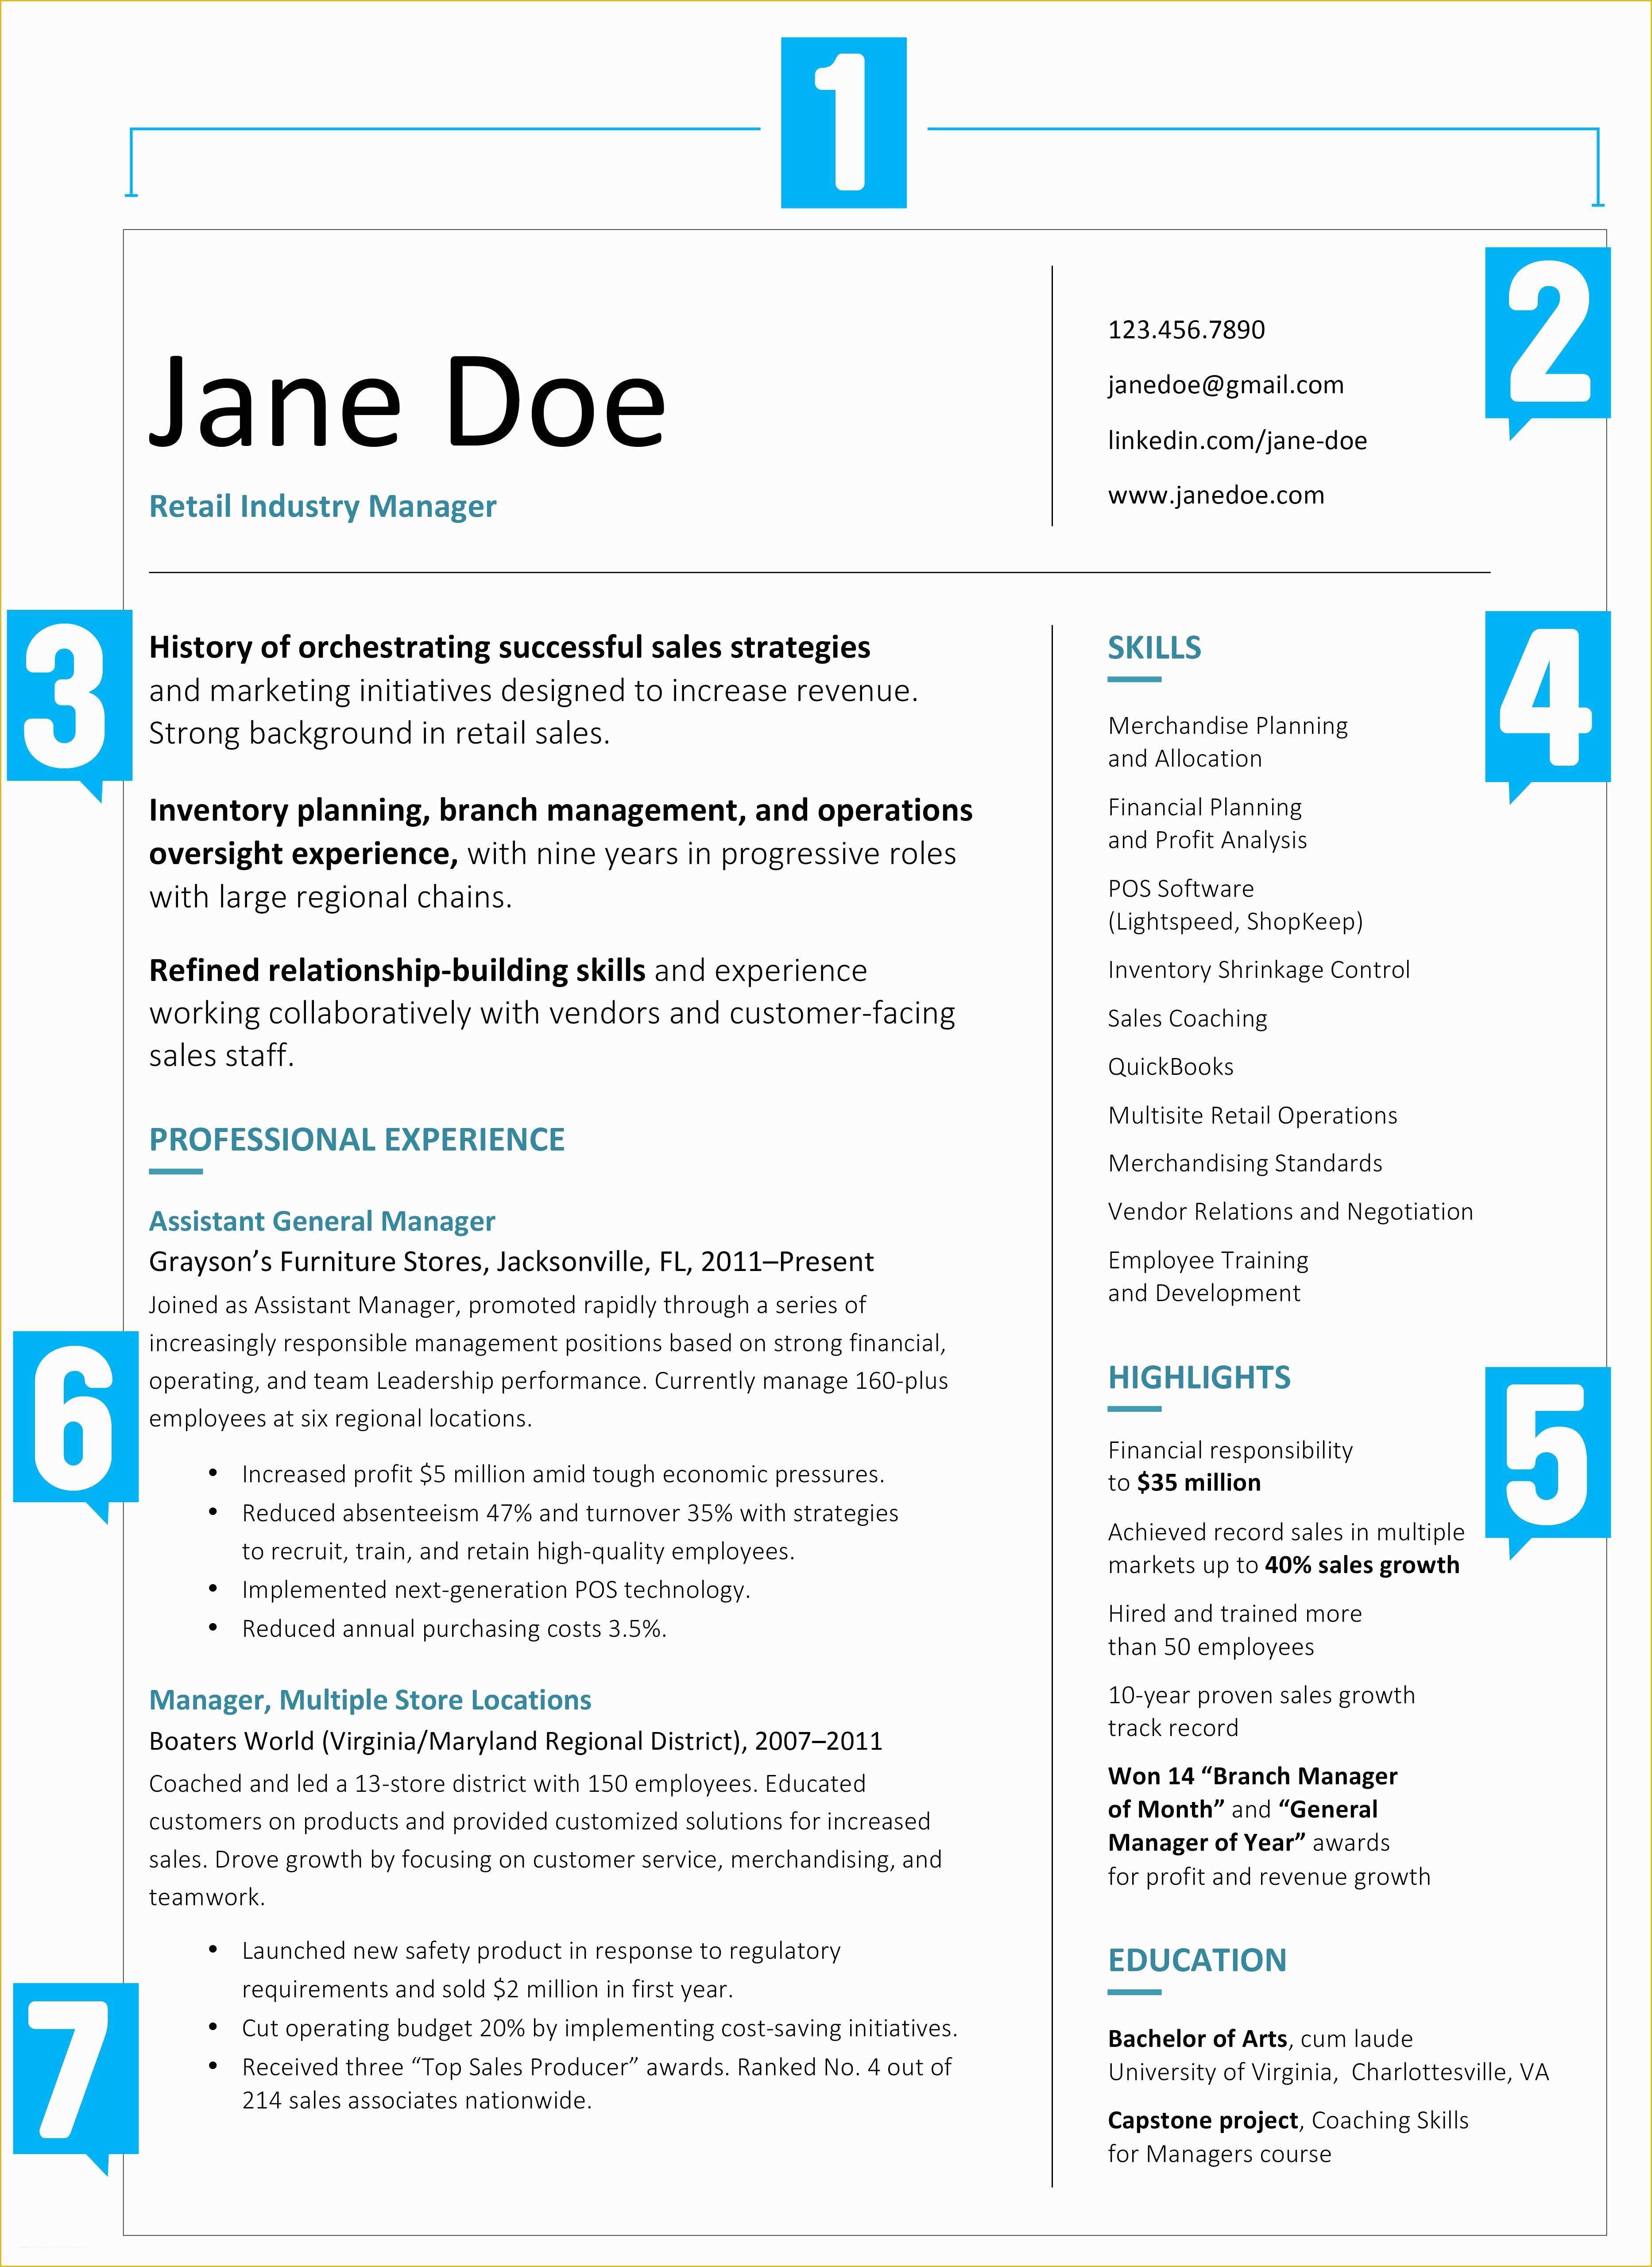 Free Professional Resume Templates 2017 Of What Your Resume Should Look Like In 2017